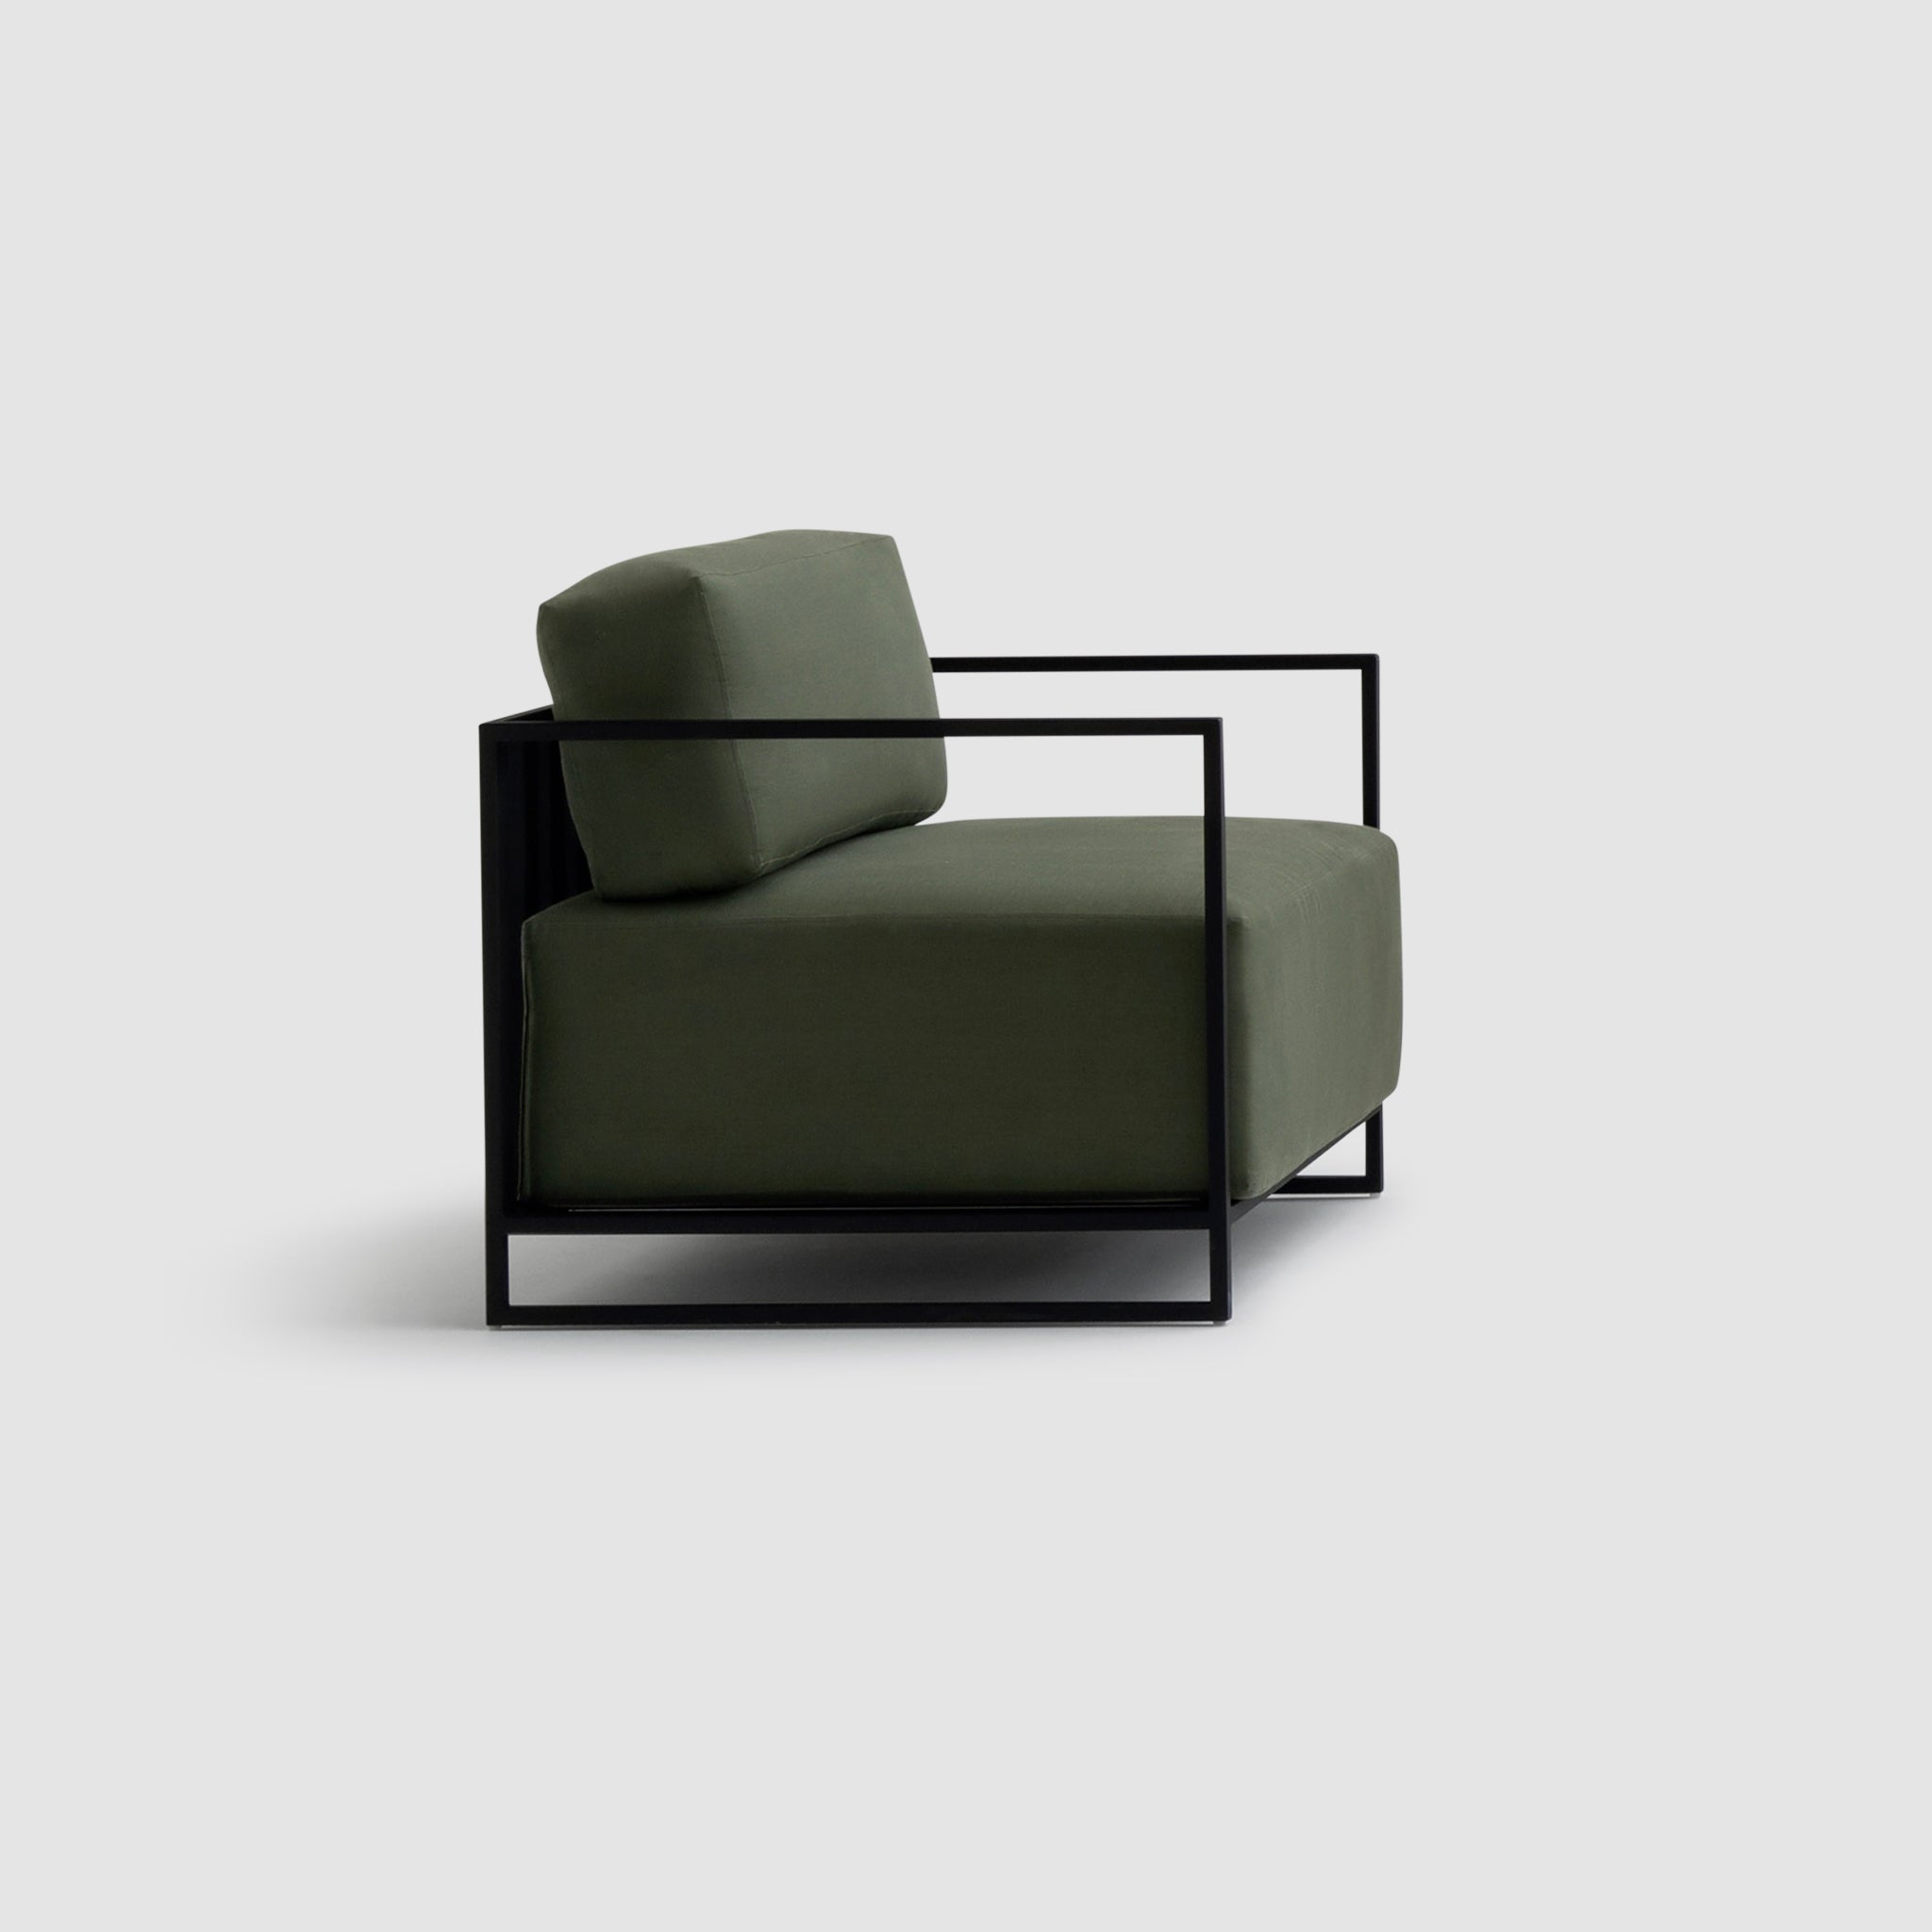 Side view of The Dexter Accent Chair featuring a sleek black metal frame and olive green cushions, showcasing its modern and minimalist design.